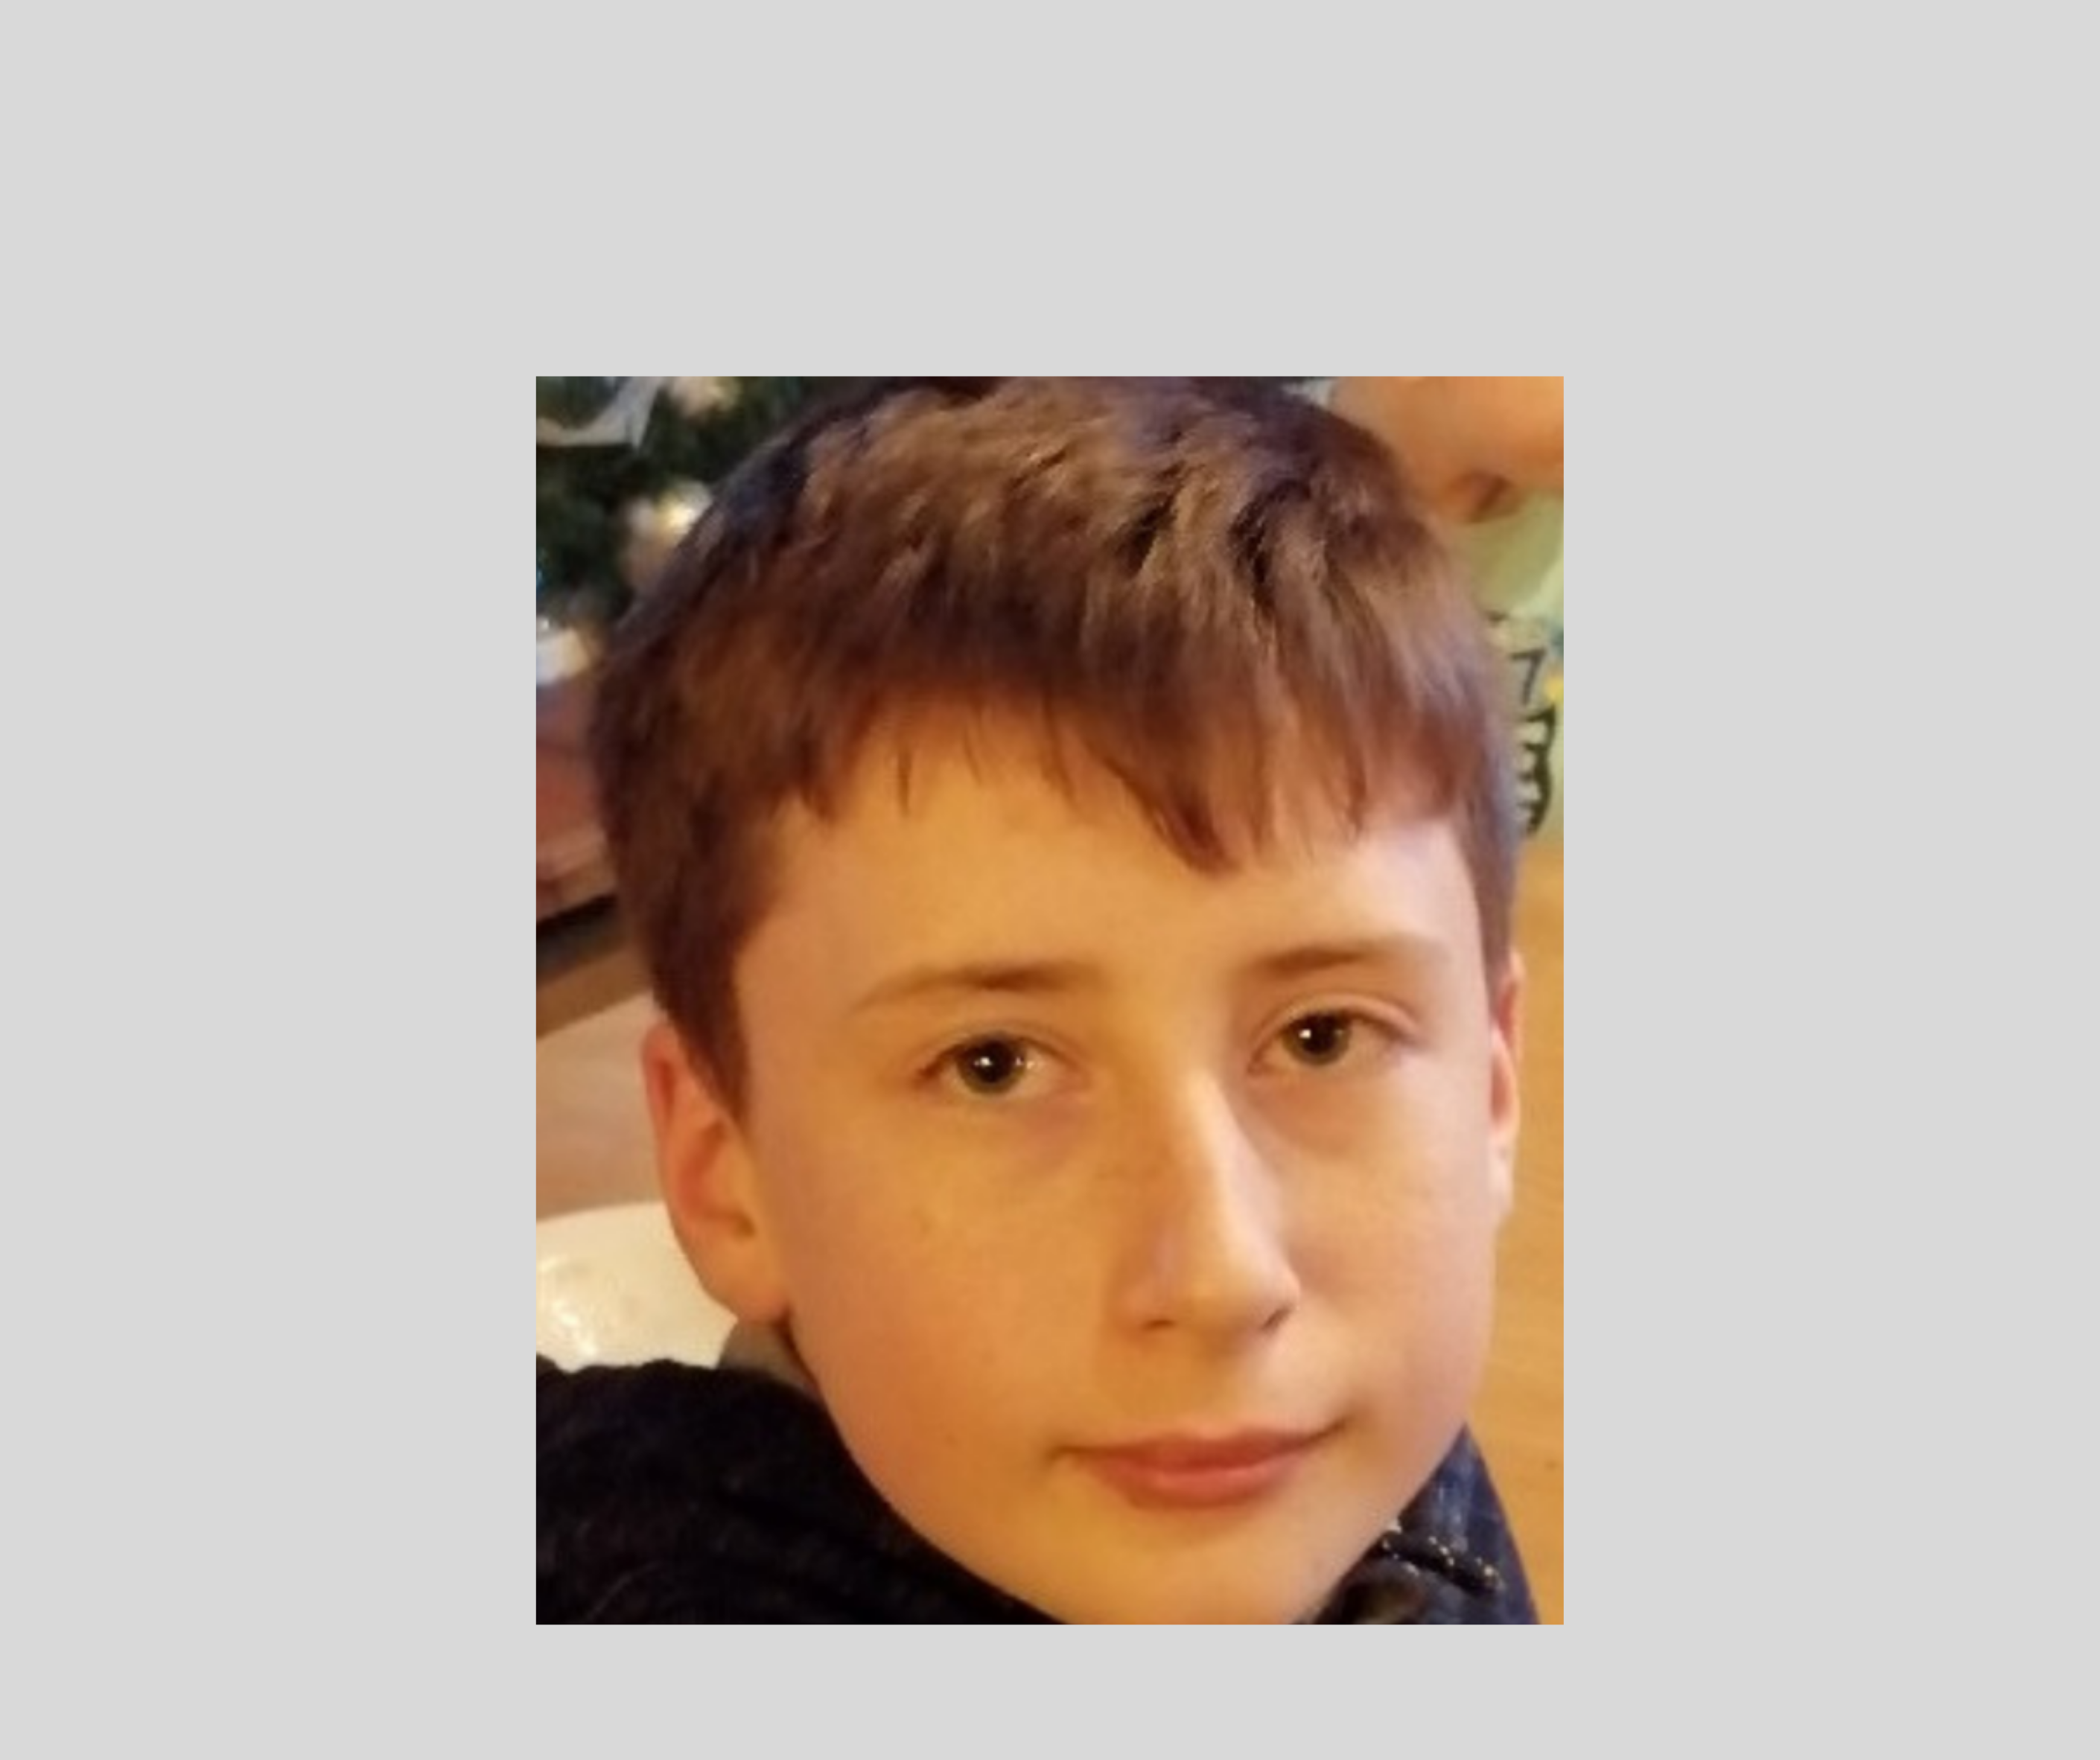 NEWS | Police appeal to find missing 14-year-old who was last seen on Monday